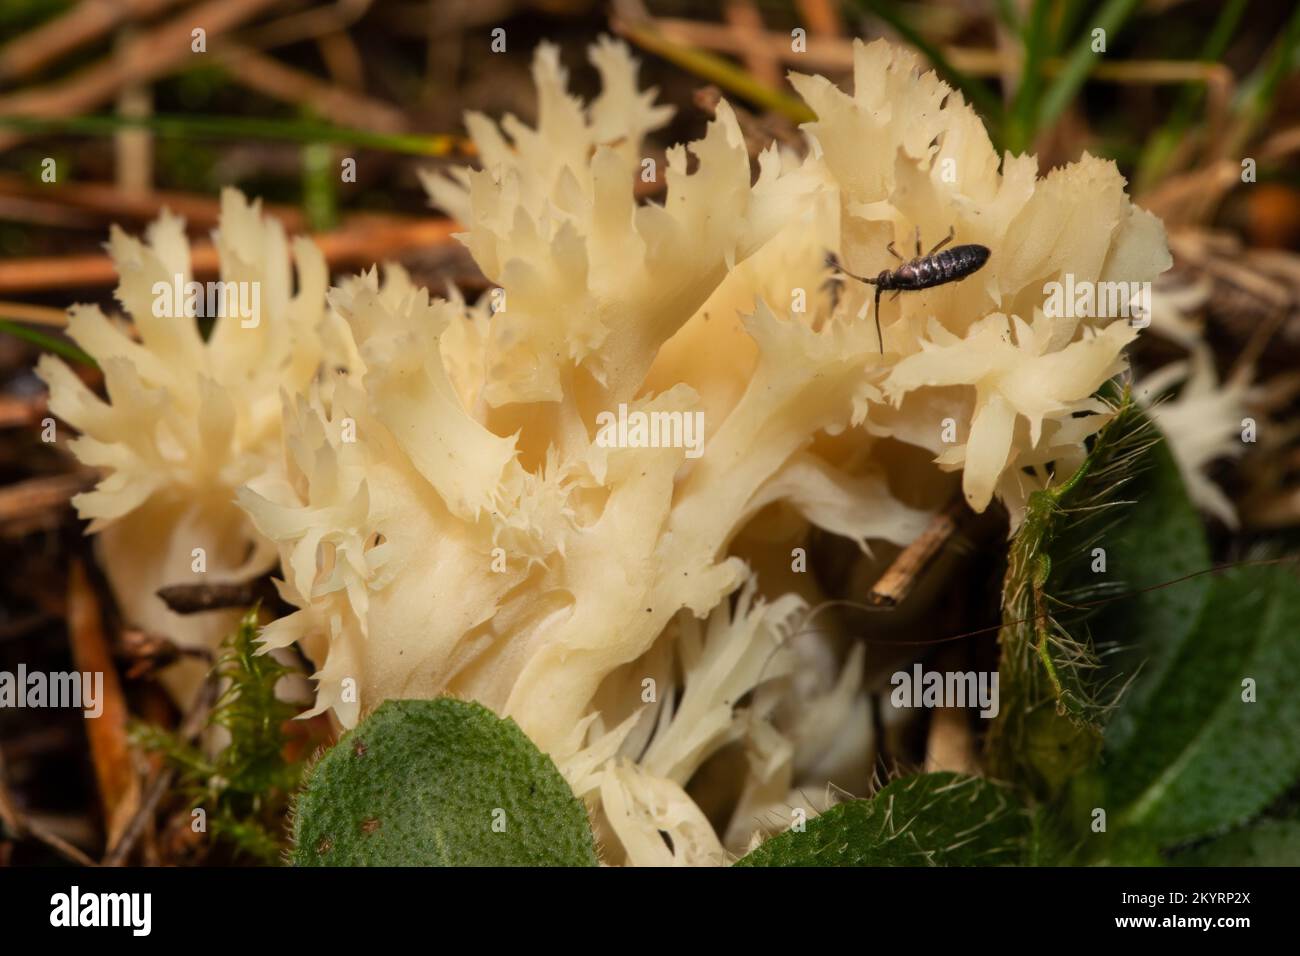 Comb coral fruiting body some brown-white branches with beetle Stock Photo